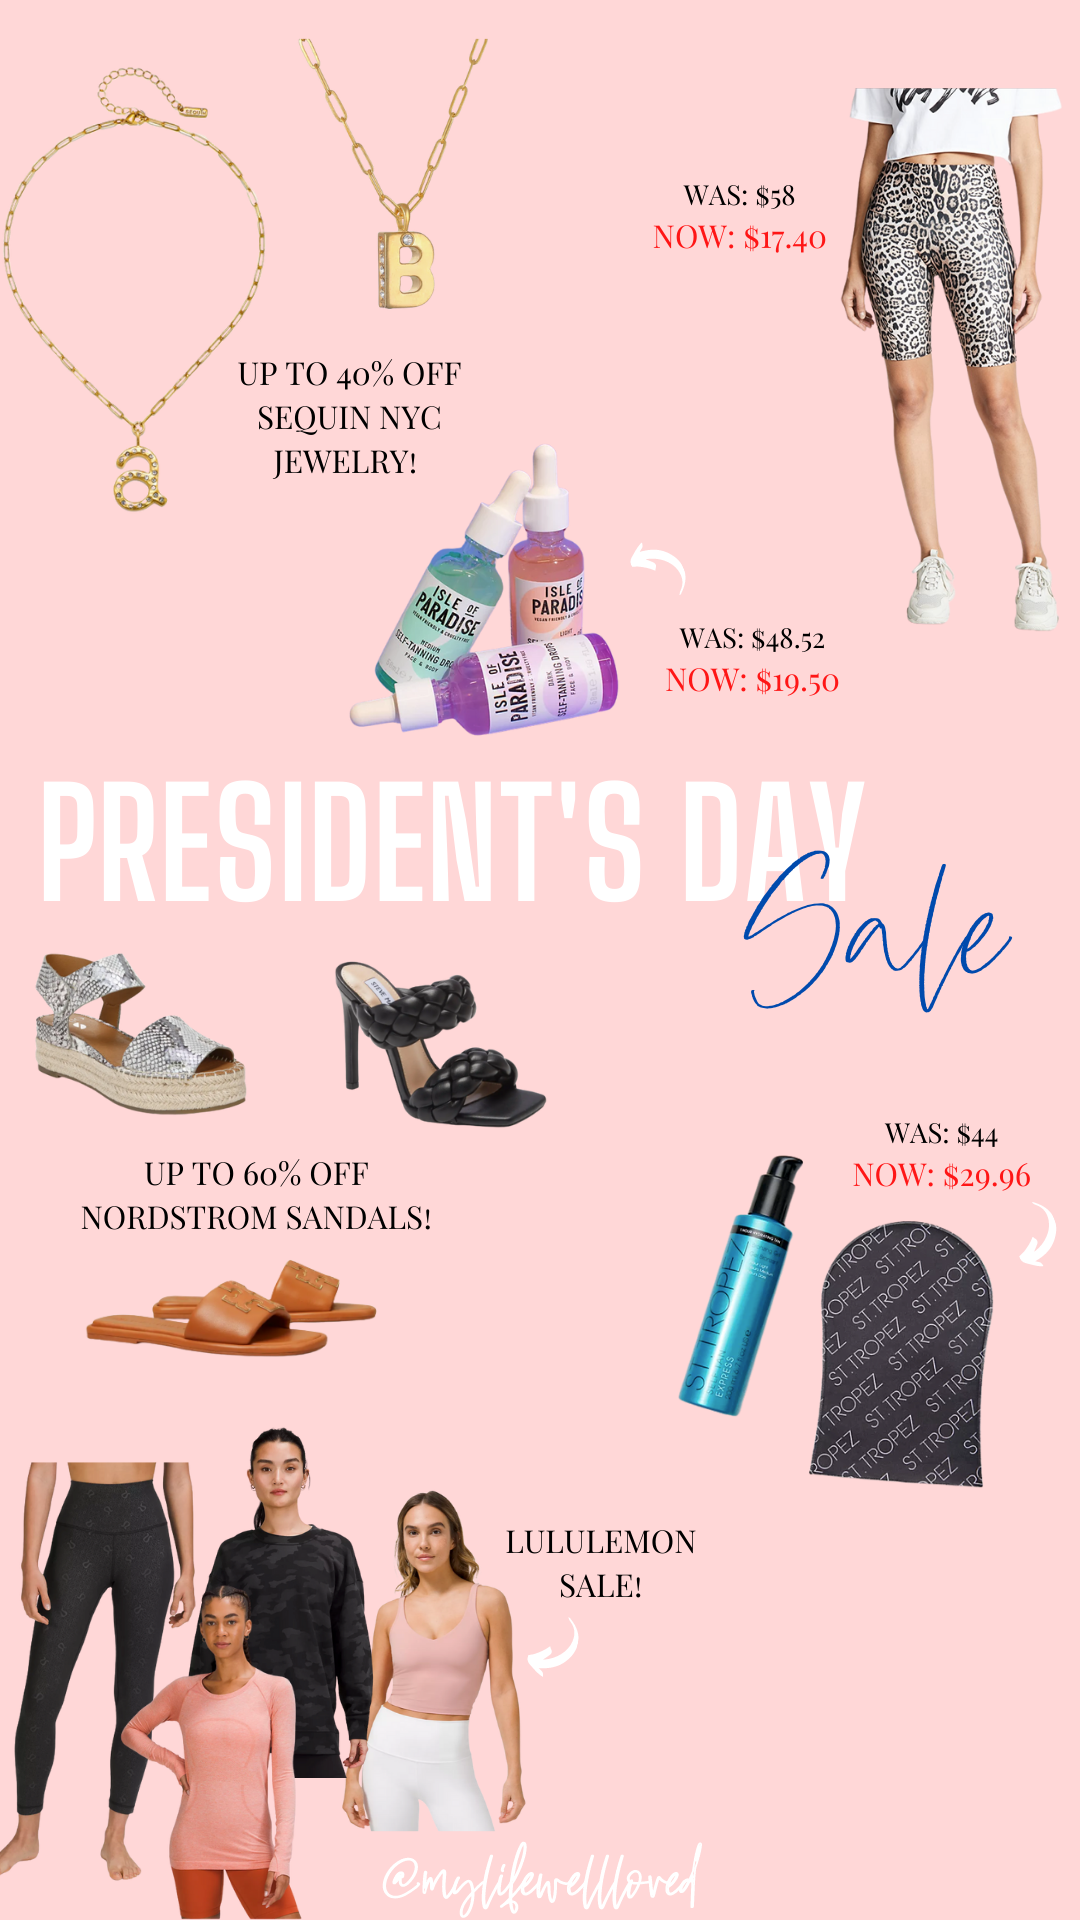 Fashion + Lifestyle blogger, My Life Well Loved, shares her finds from President's Day sales! Check it out here!